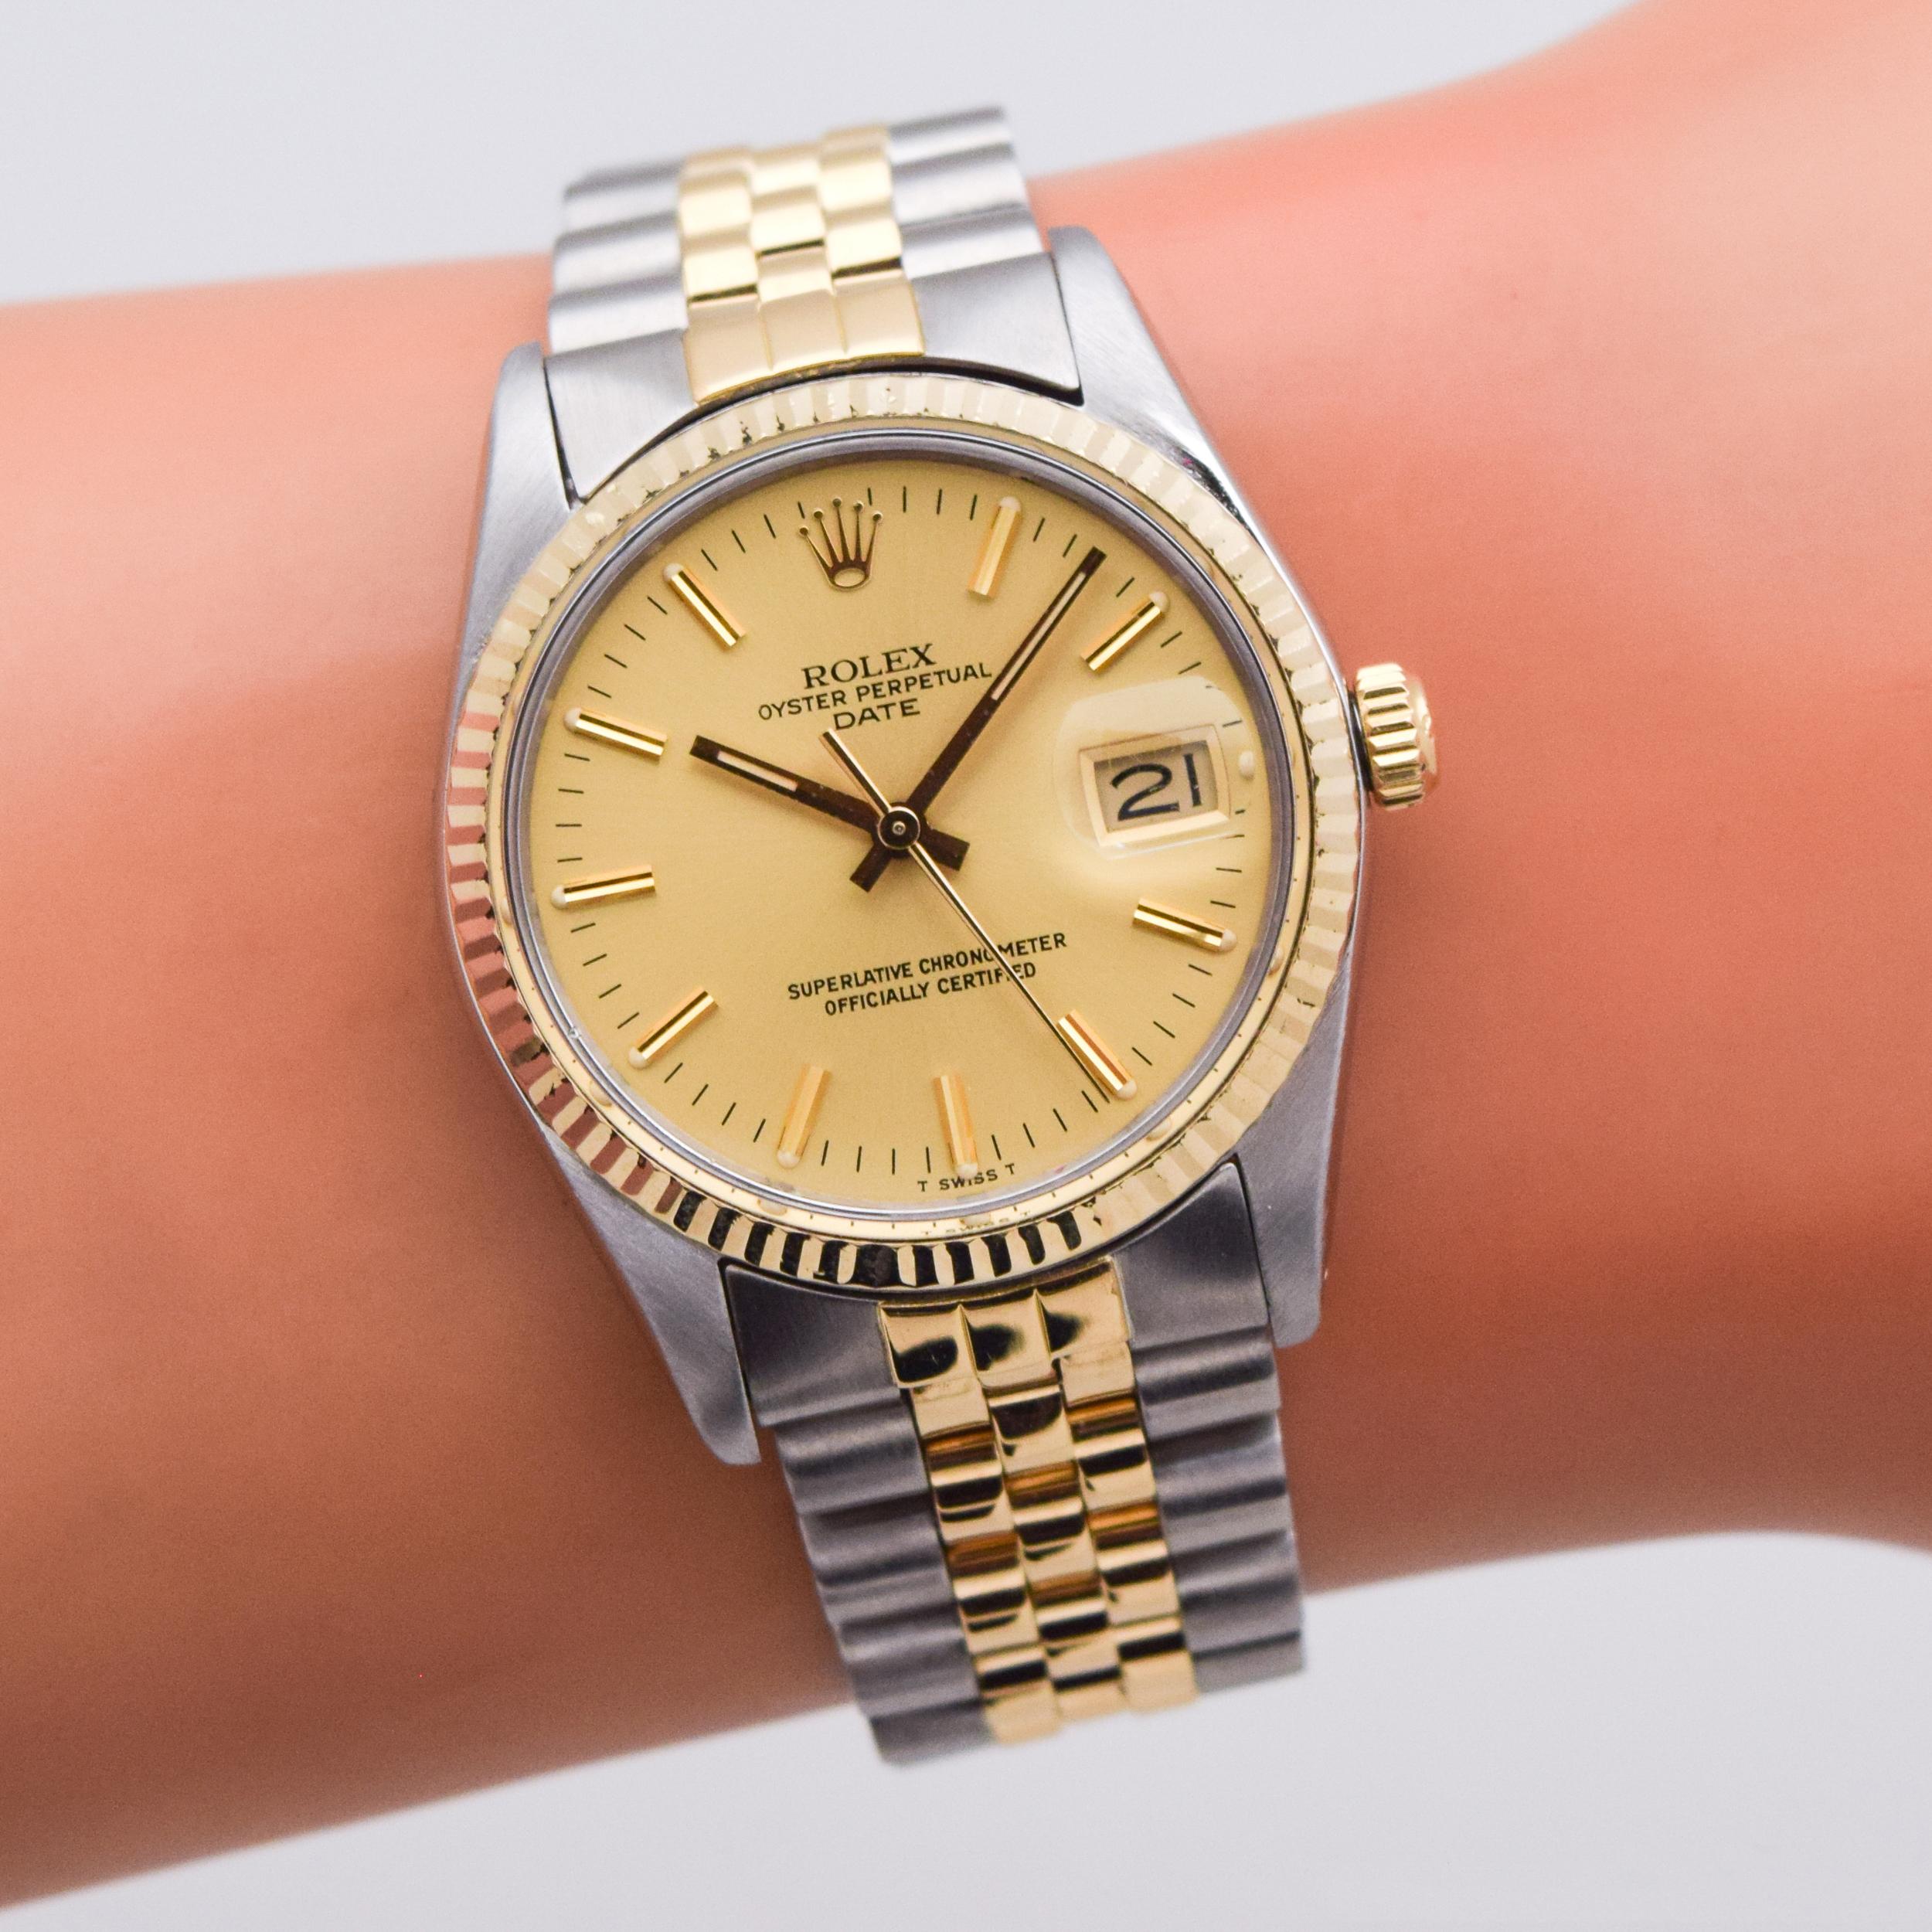 Vintage Rolex Date Automatic Reference 15000 Two-Tone Watch, 1981 2